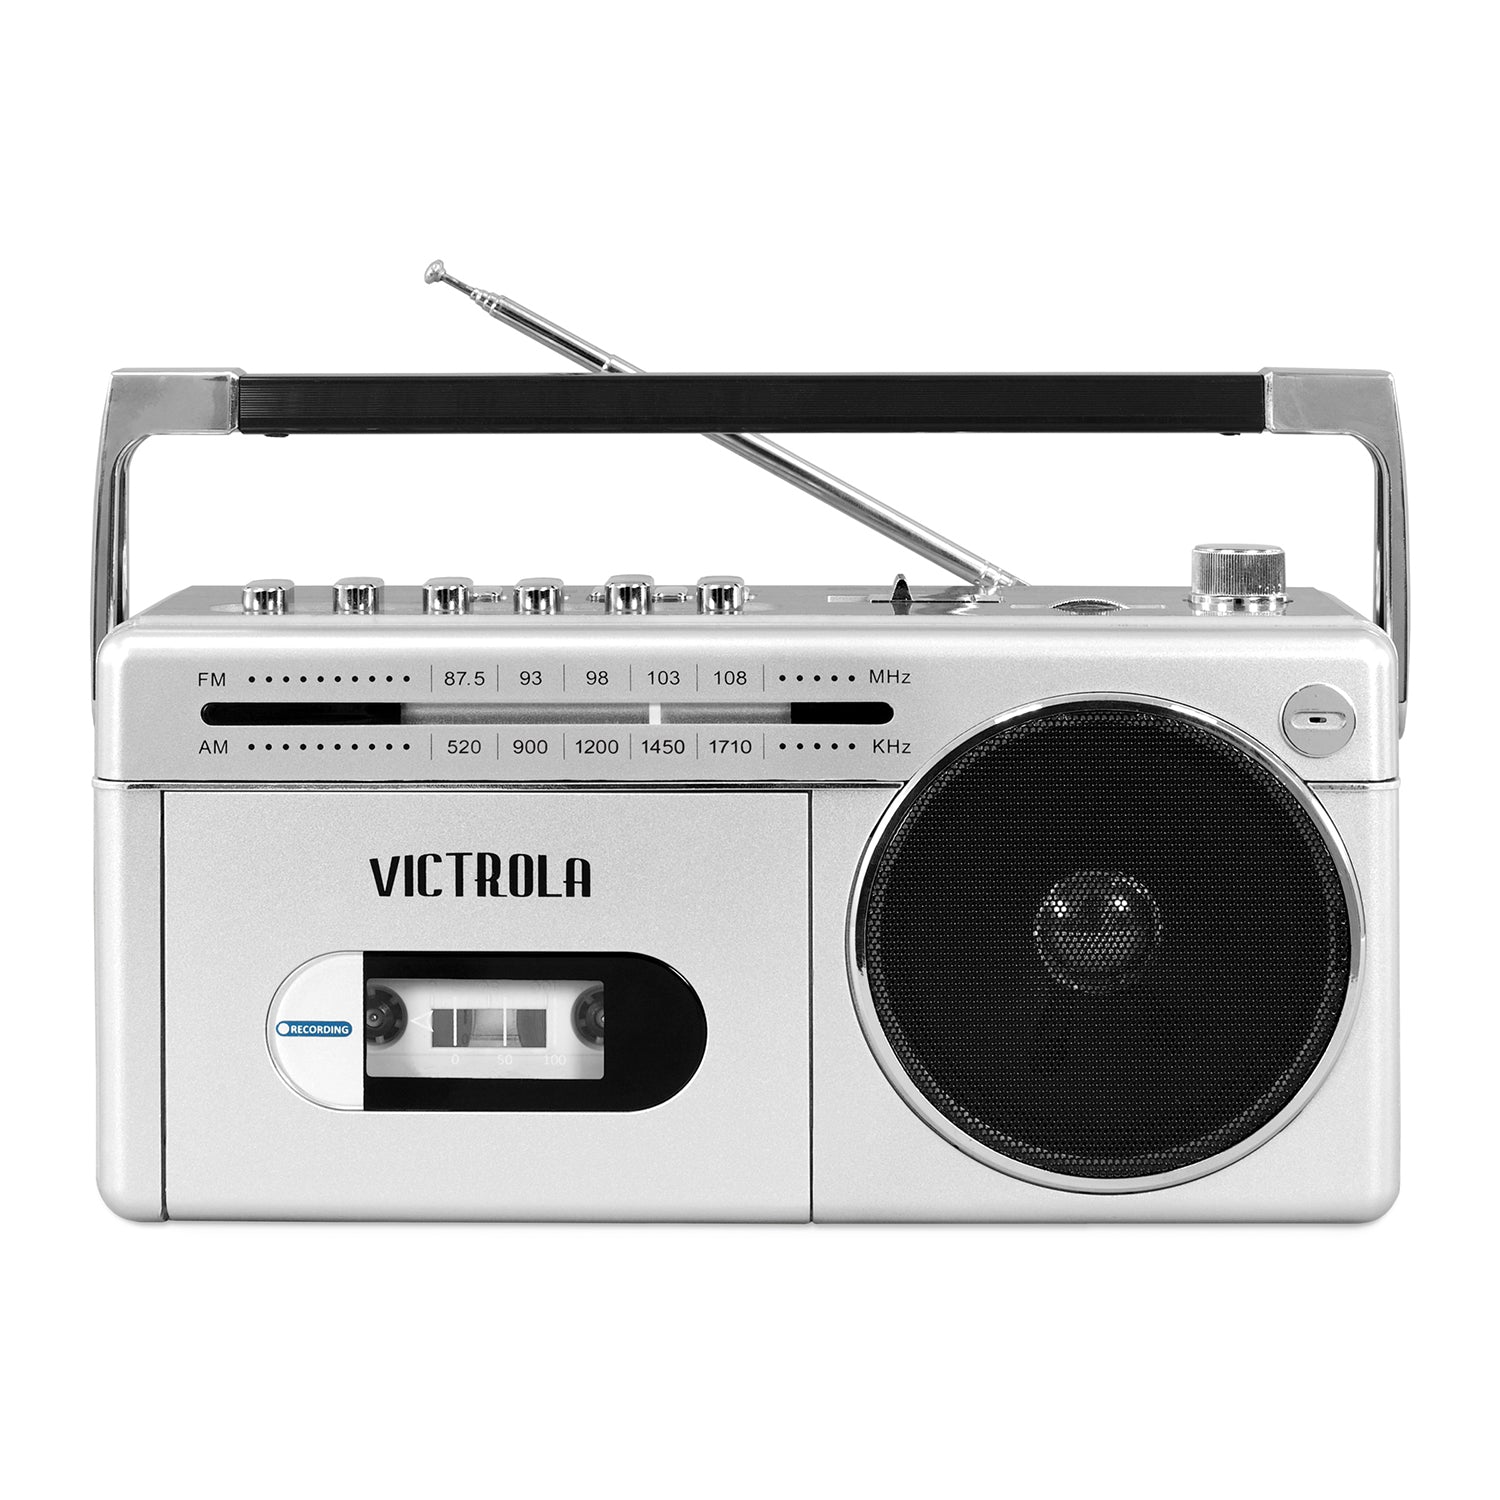 Retro Radio and Recorder,Retro Bluetooth Boombox Cassette Player,AM/FM  Radio Cassette Player Recorder,Classic 80s Style with Modern  Technology,Gifts